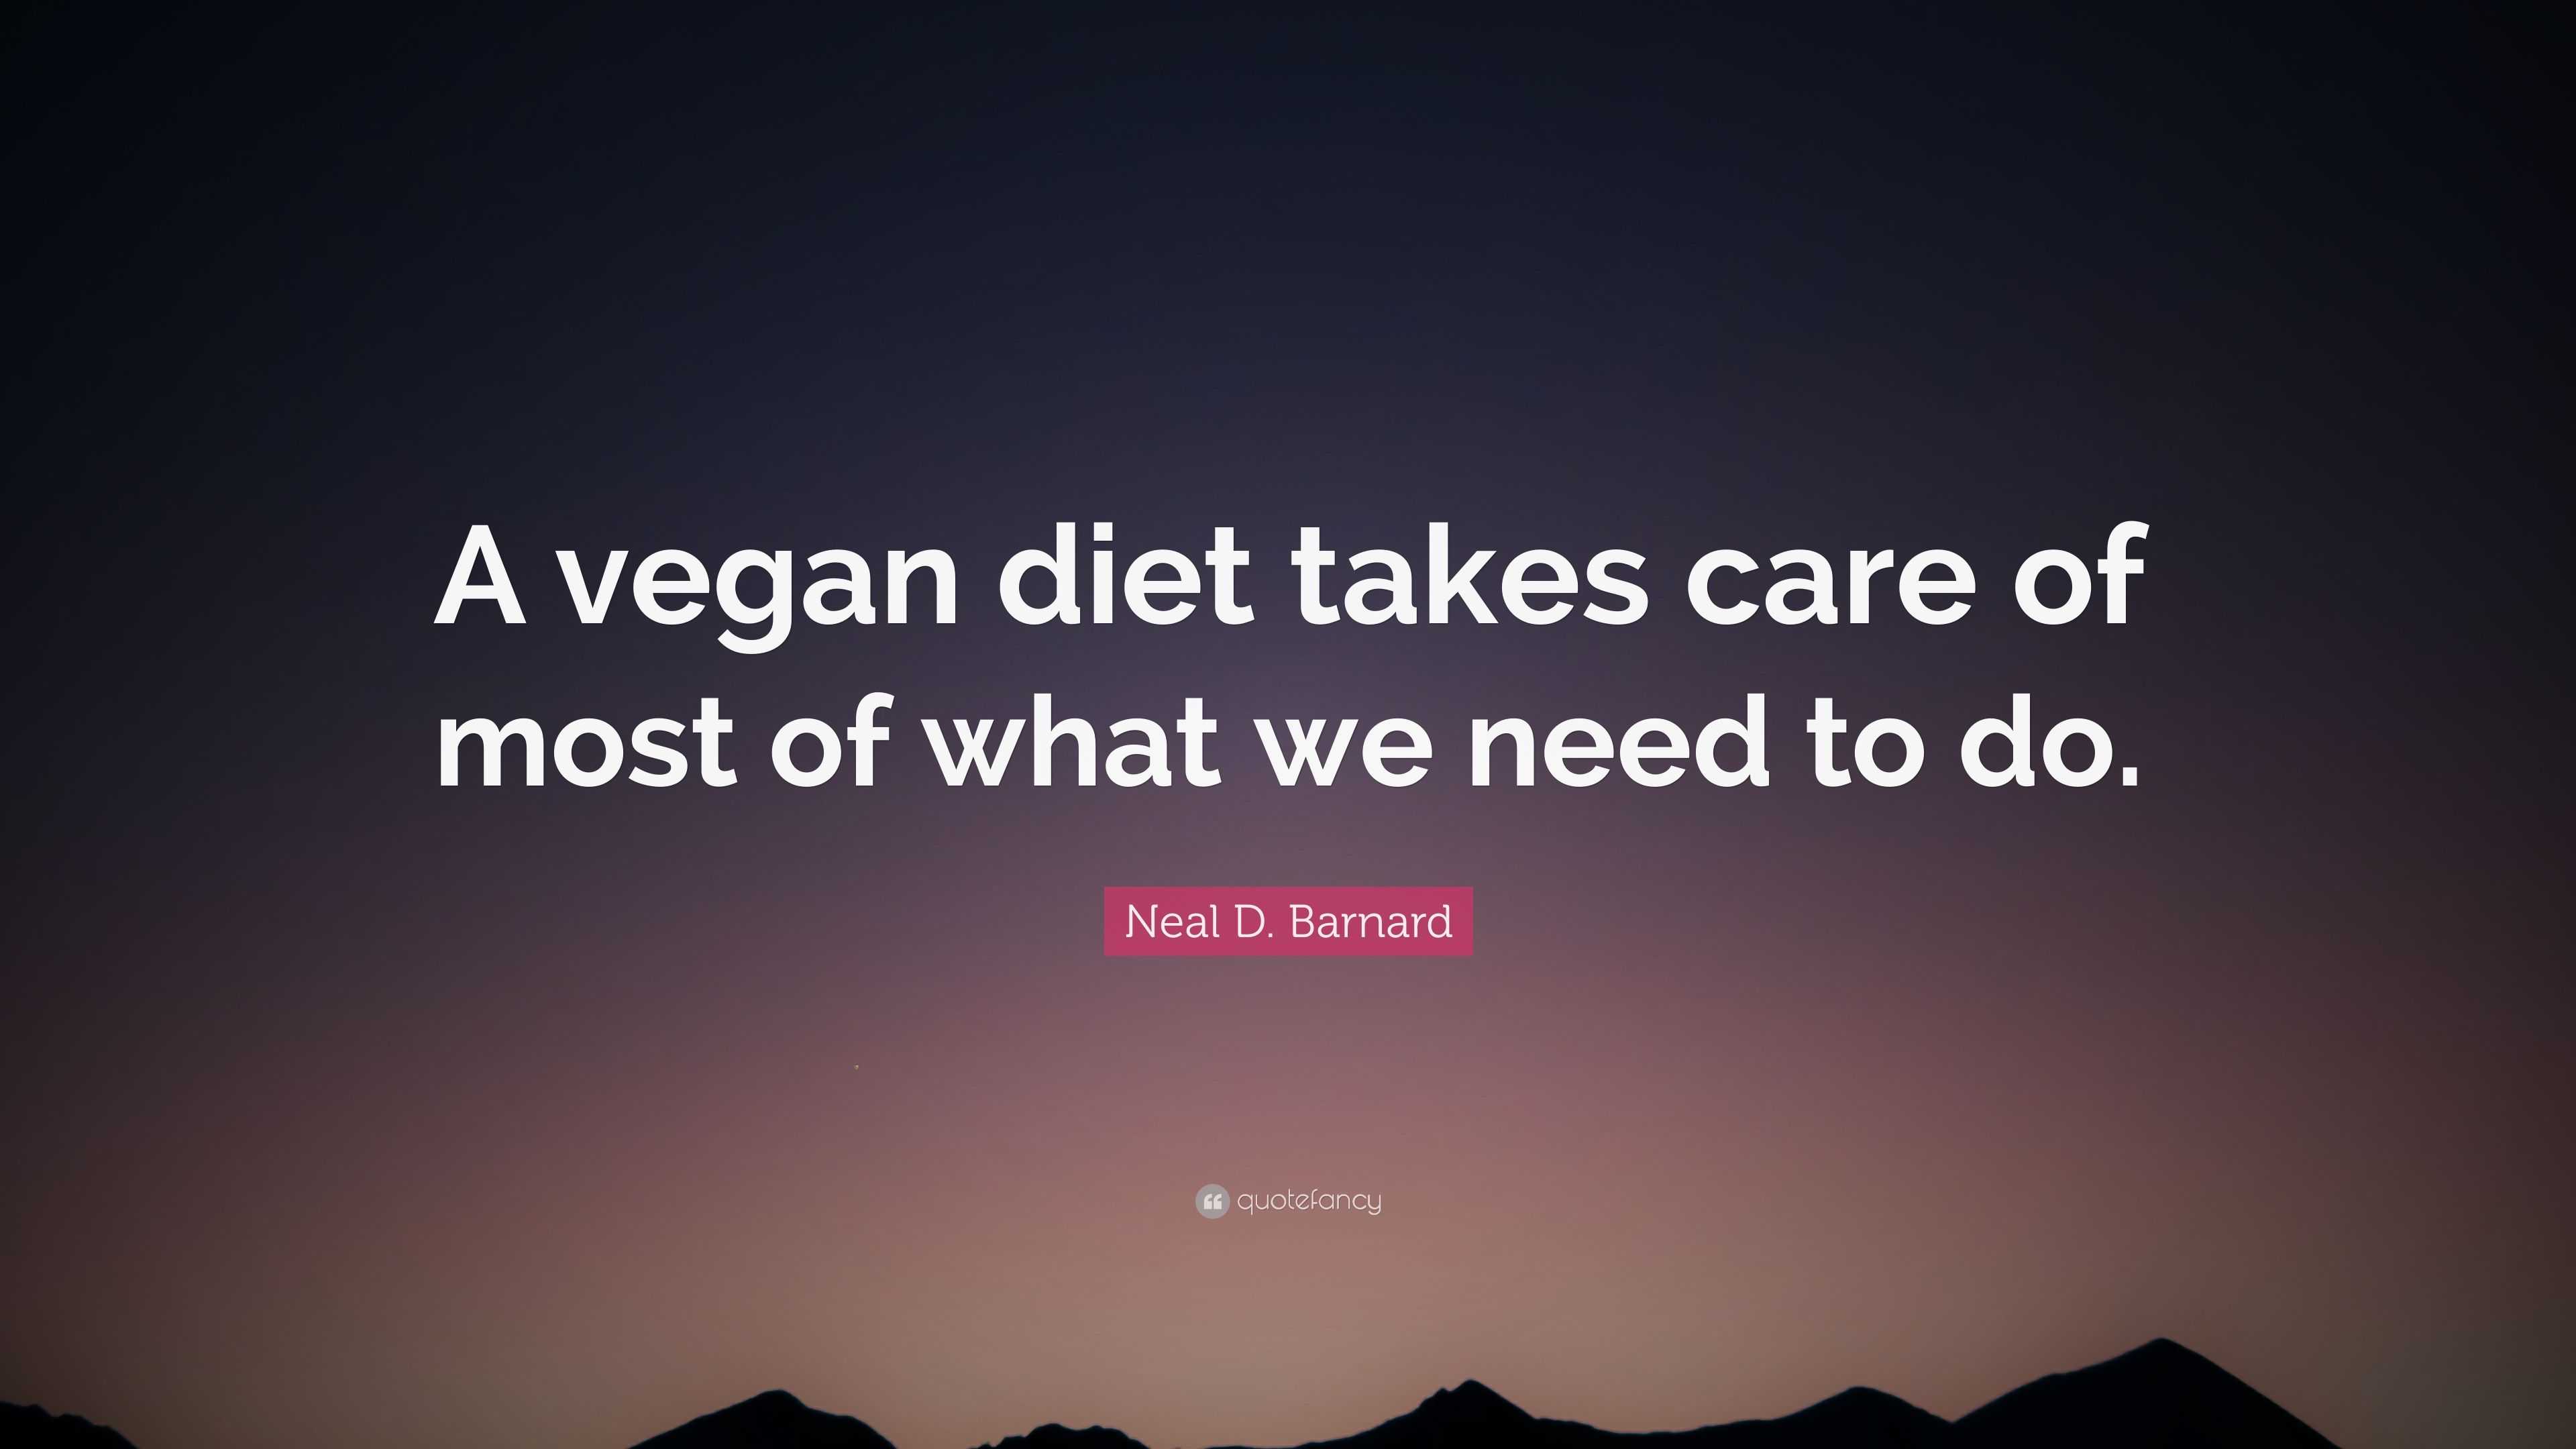 Neal D Barnard Quote “a Vegan Diet Takes Care Of Most Of What We Need To Do” 2420